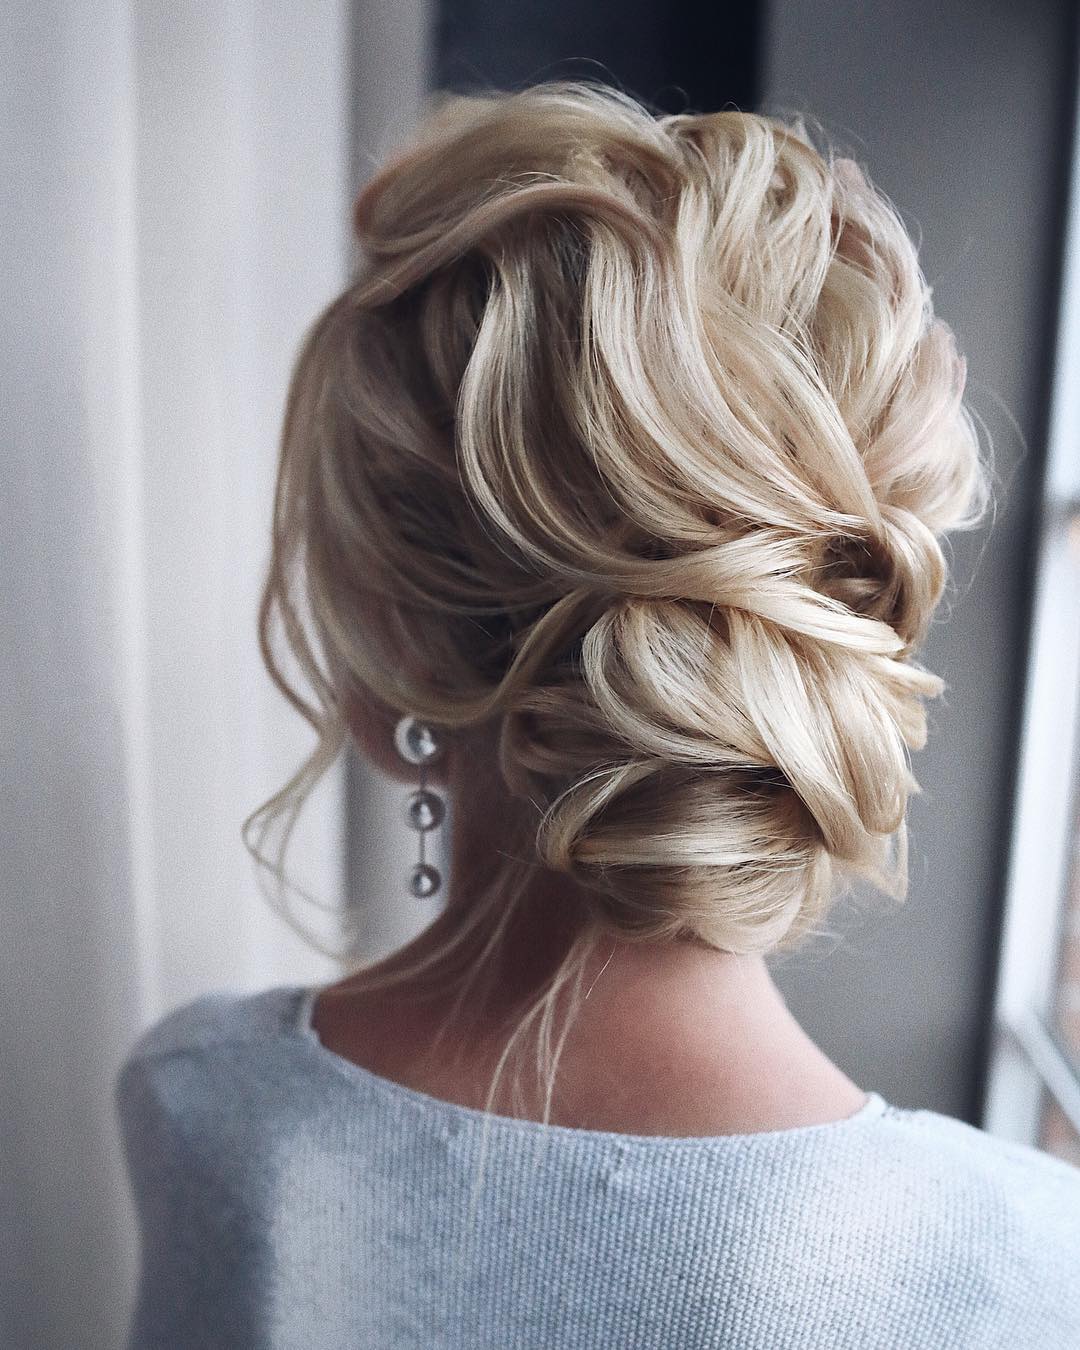 10 Updos for Medium Length Hair - Prom & Homecoming Hairstyle Ideas 2021